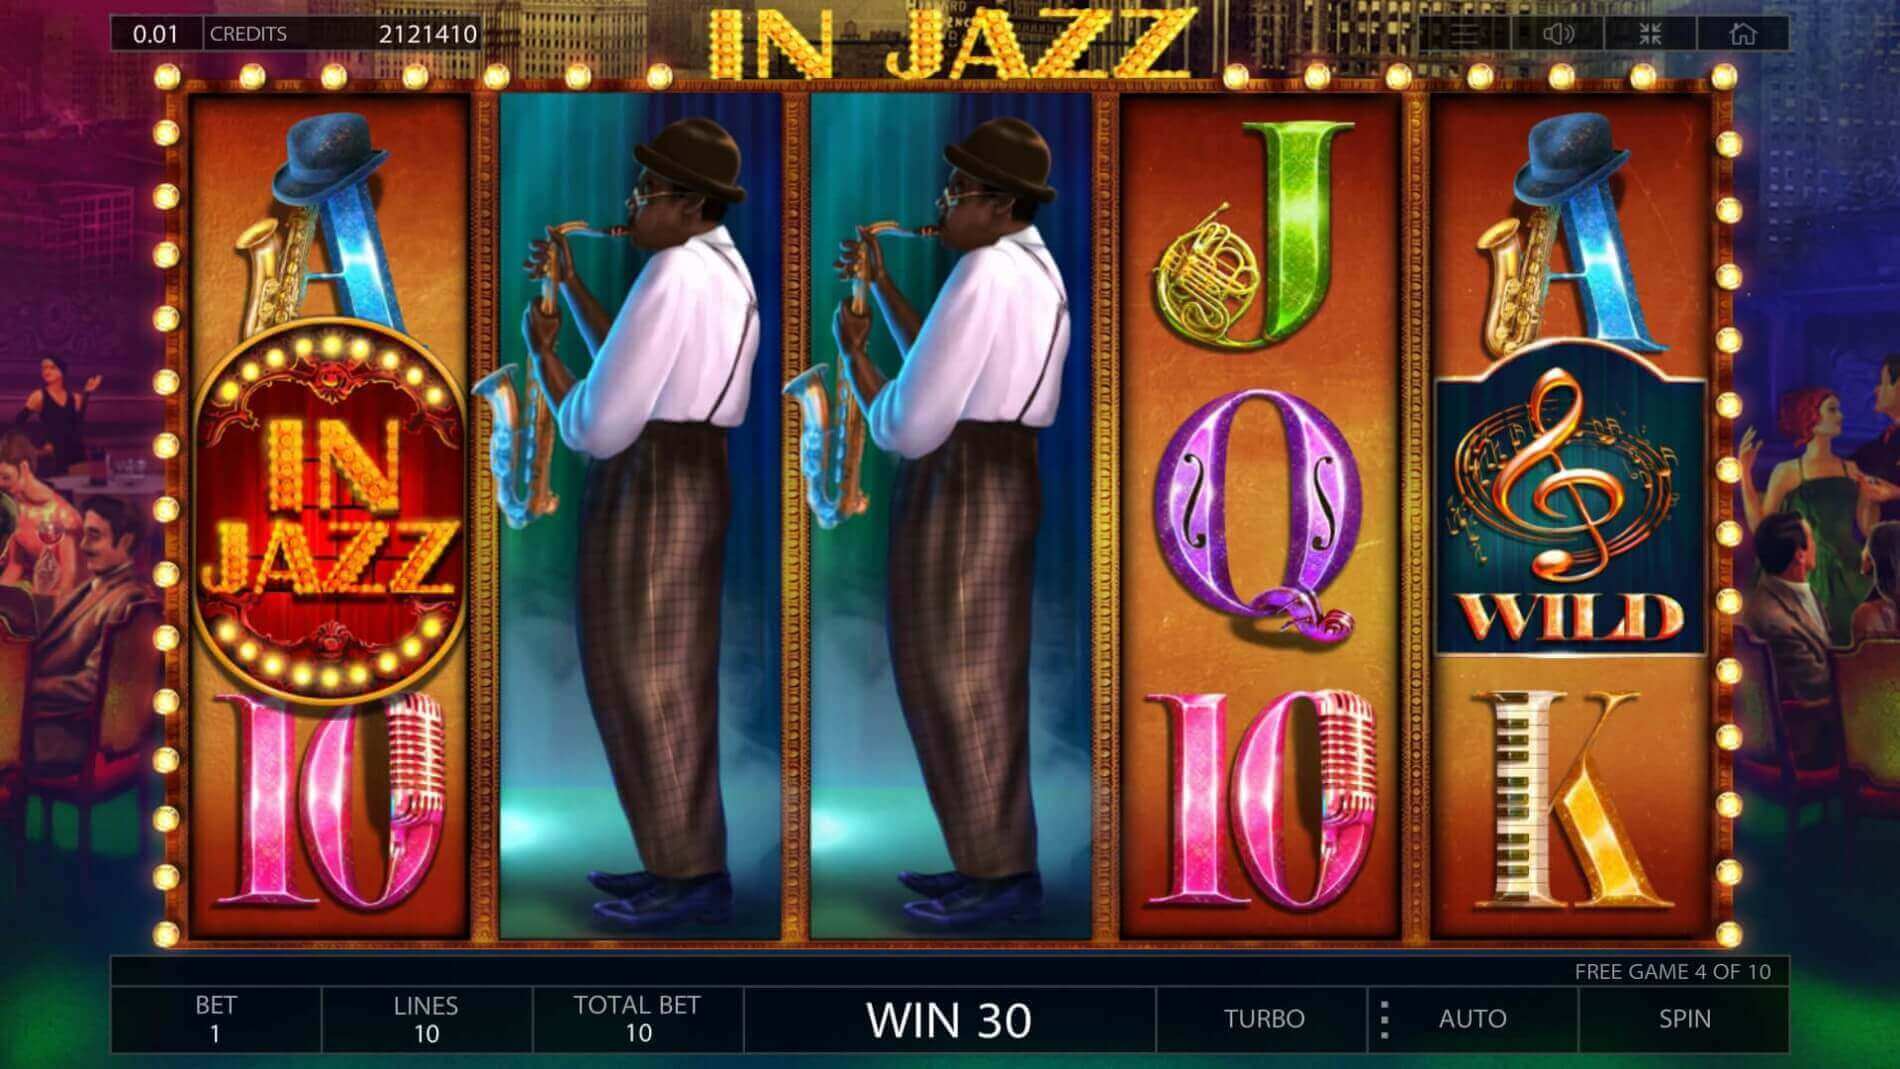 In Jazz Game process